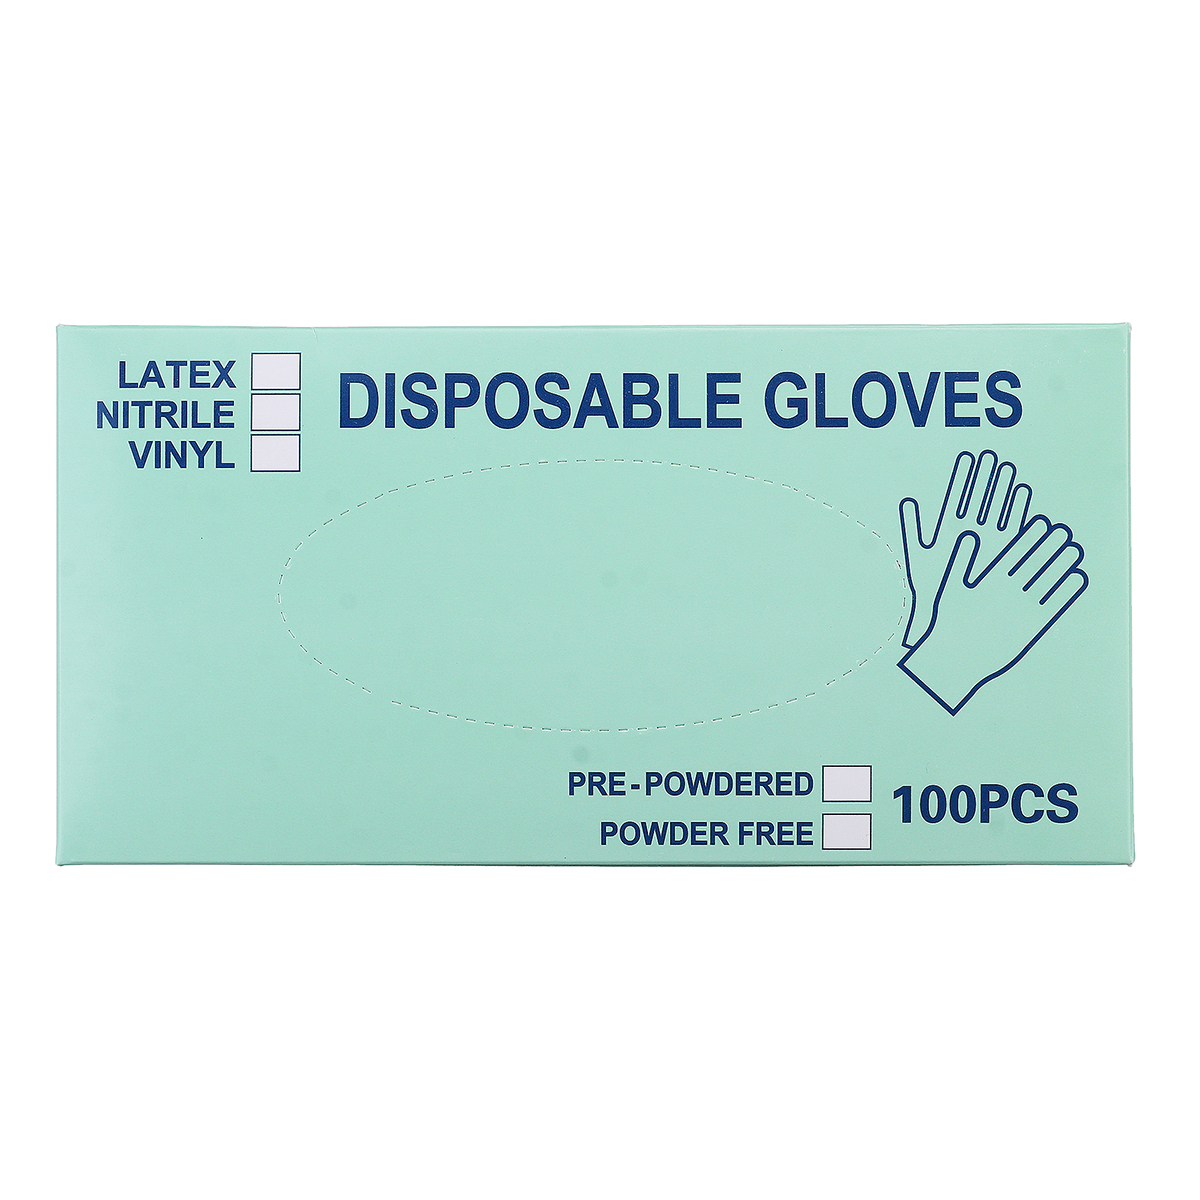 50Pairs-100Pcs-SML-Powder-Free-White-Disposable-Nitrile-Gloves-Suitable-For-Restaurant-Kitchen-Food--1688643-6